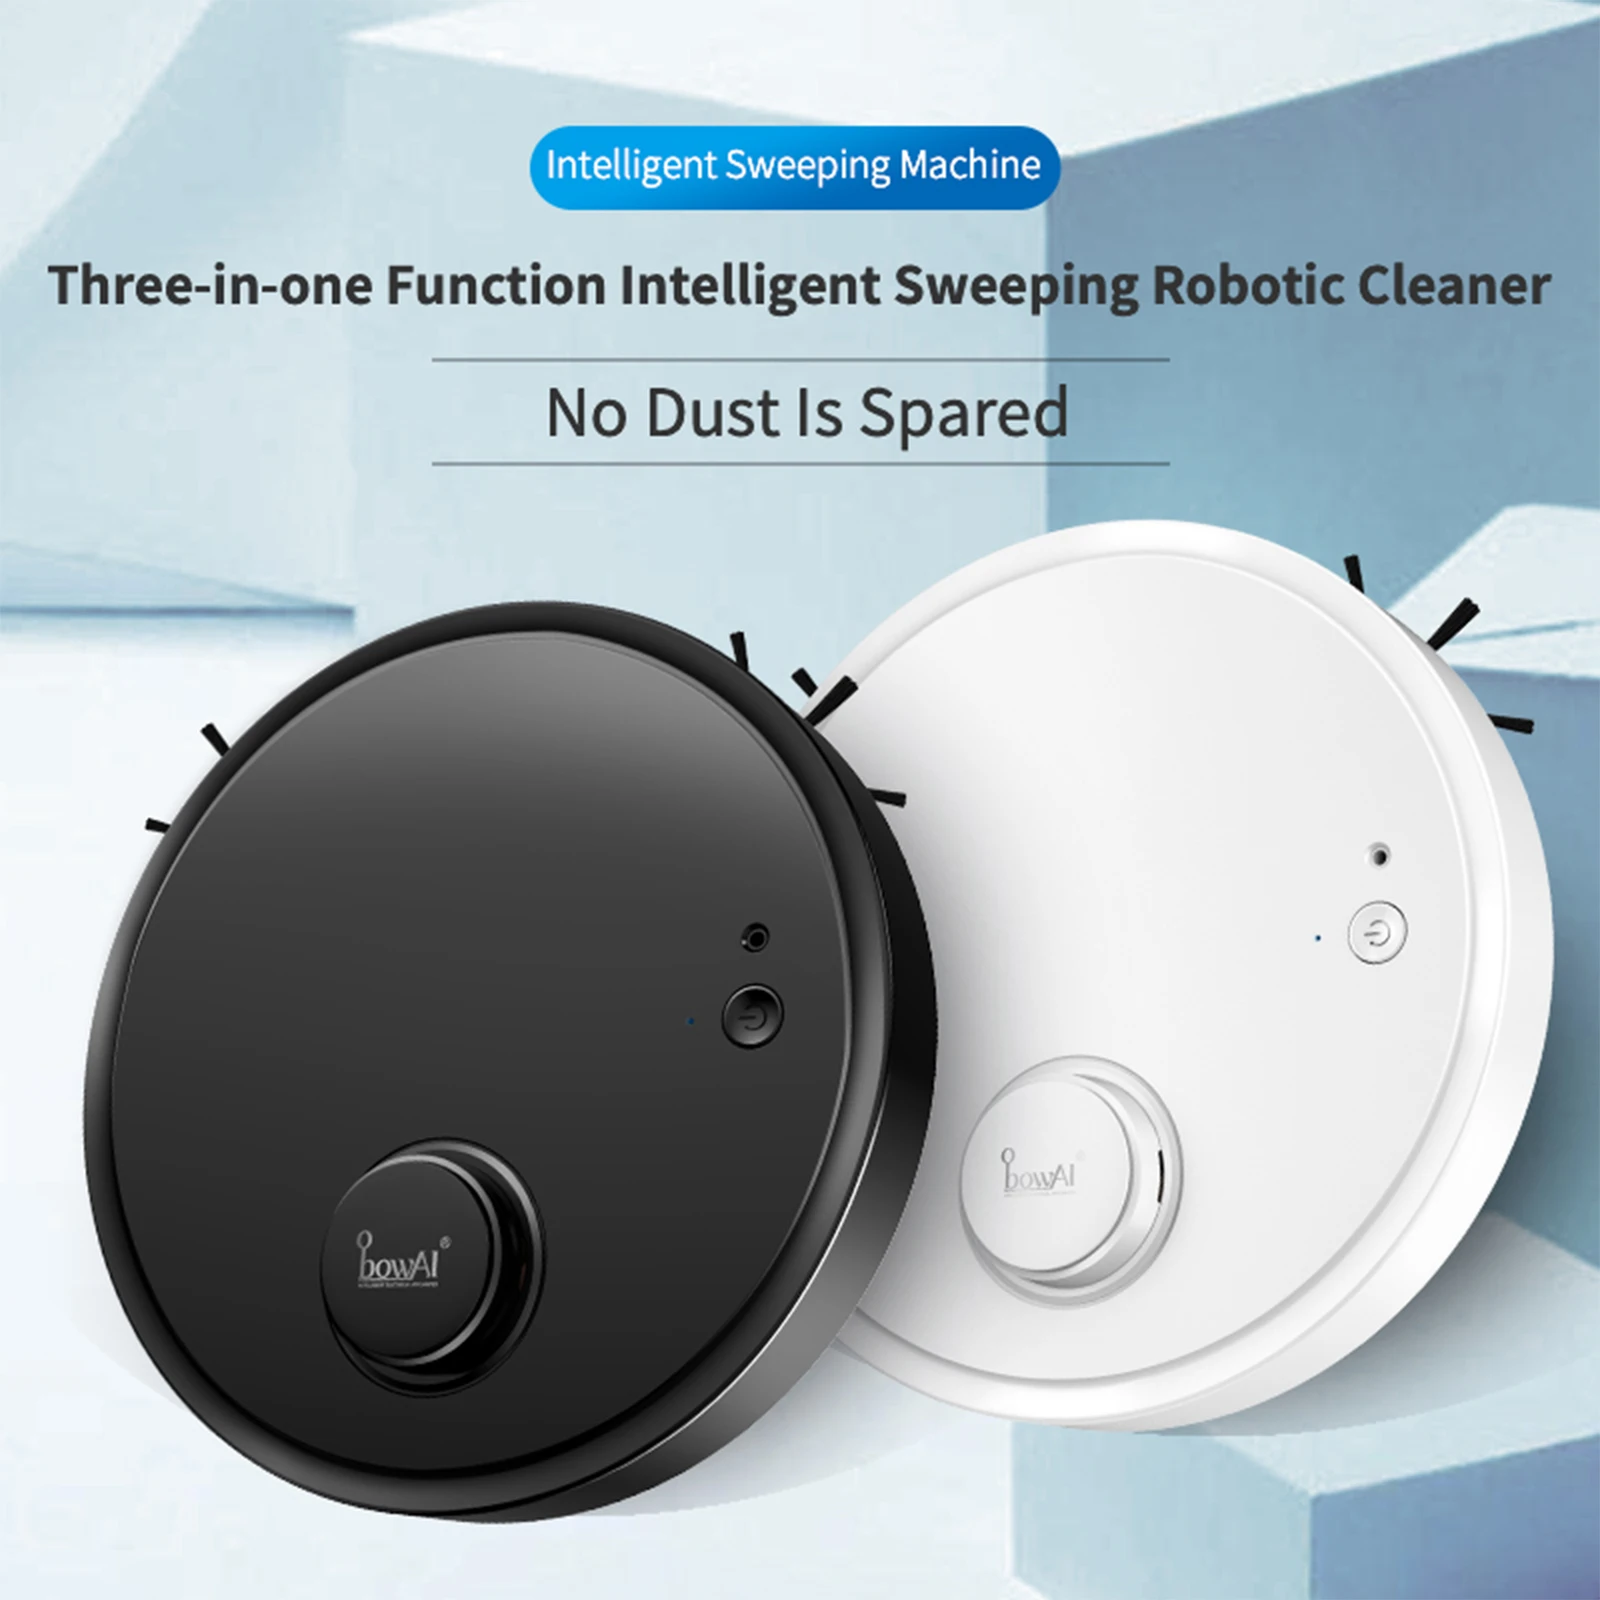 

Smart Sweeping Robots Home Sweeper Vacuuming UV Wireless Cleaner Brush Steam Sweep Dust Carpet Sonic Mopping Auto-Empty Strong